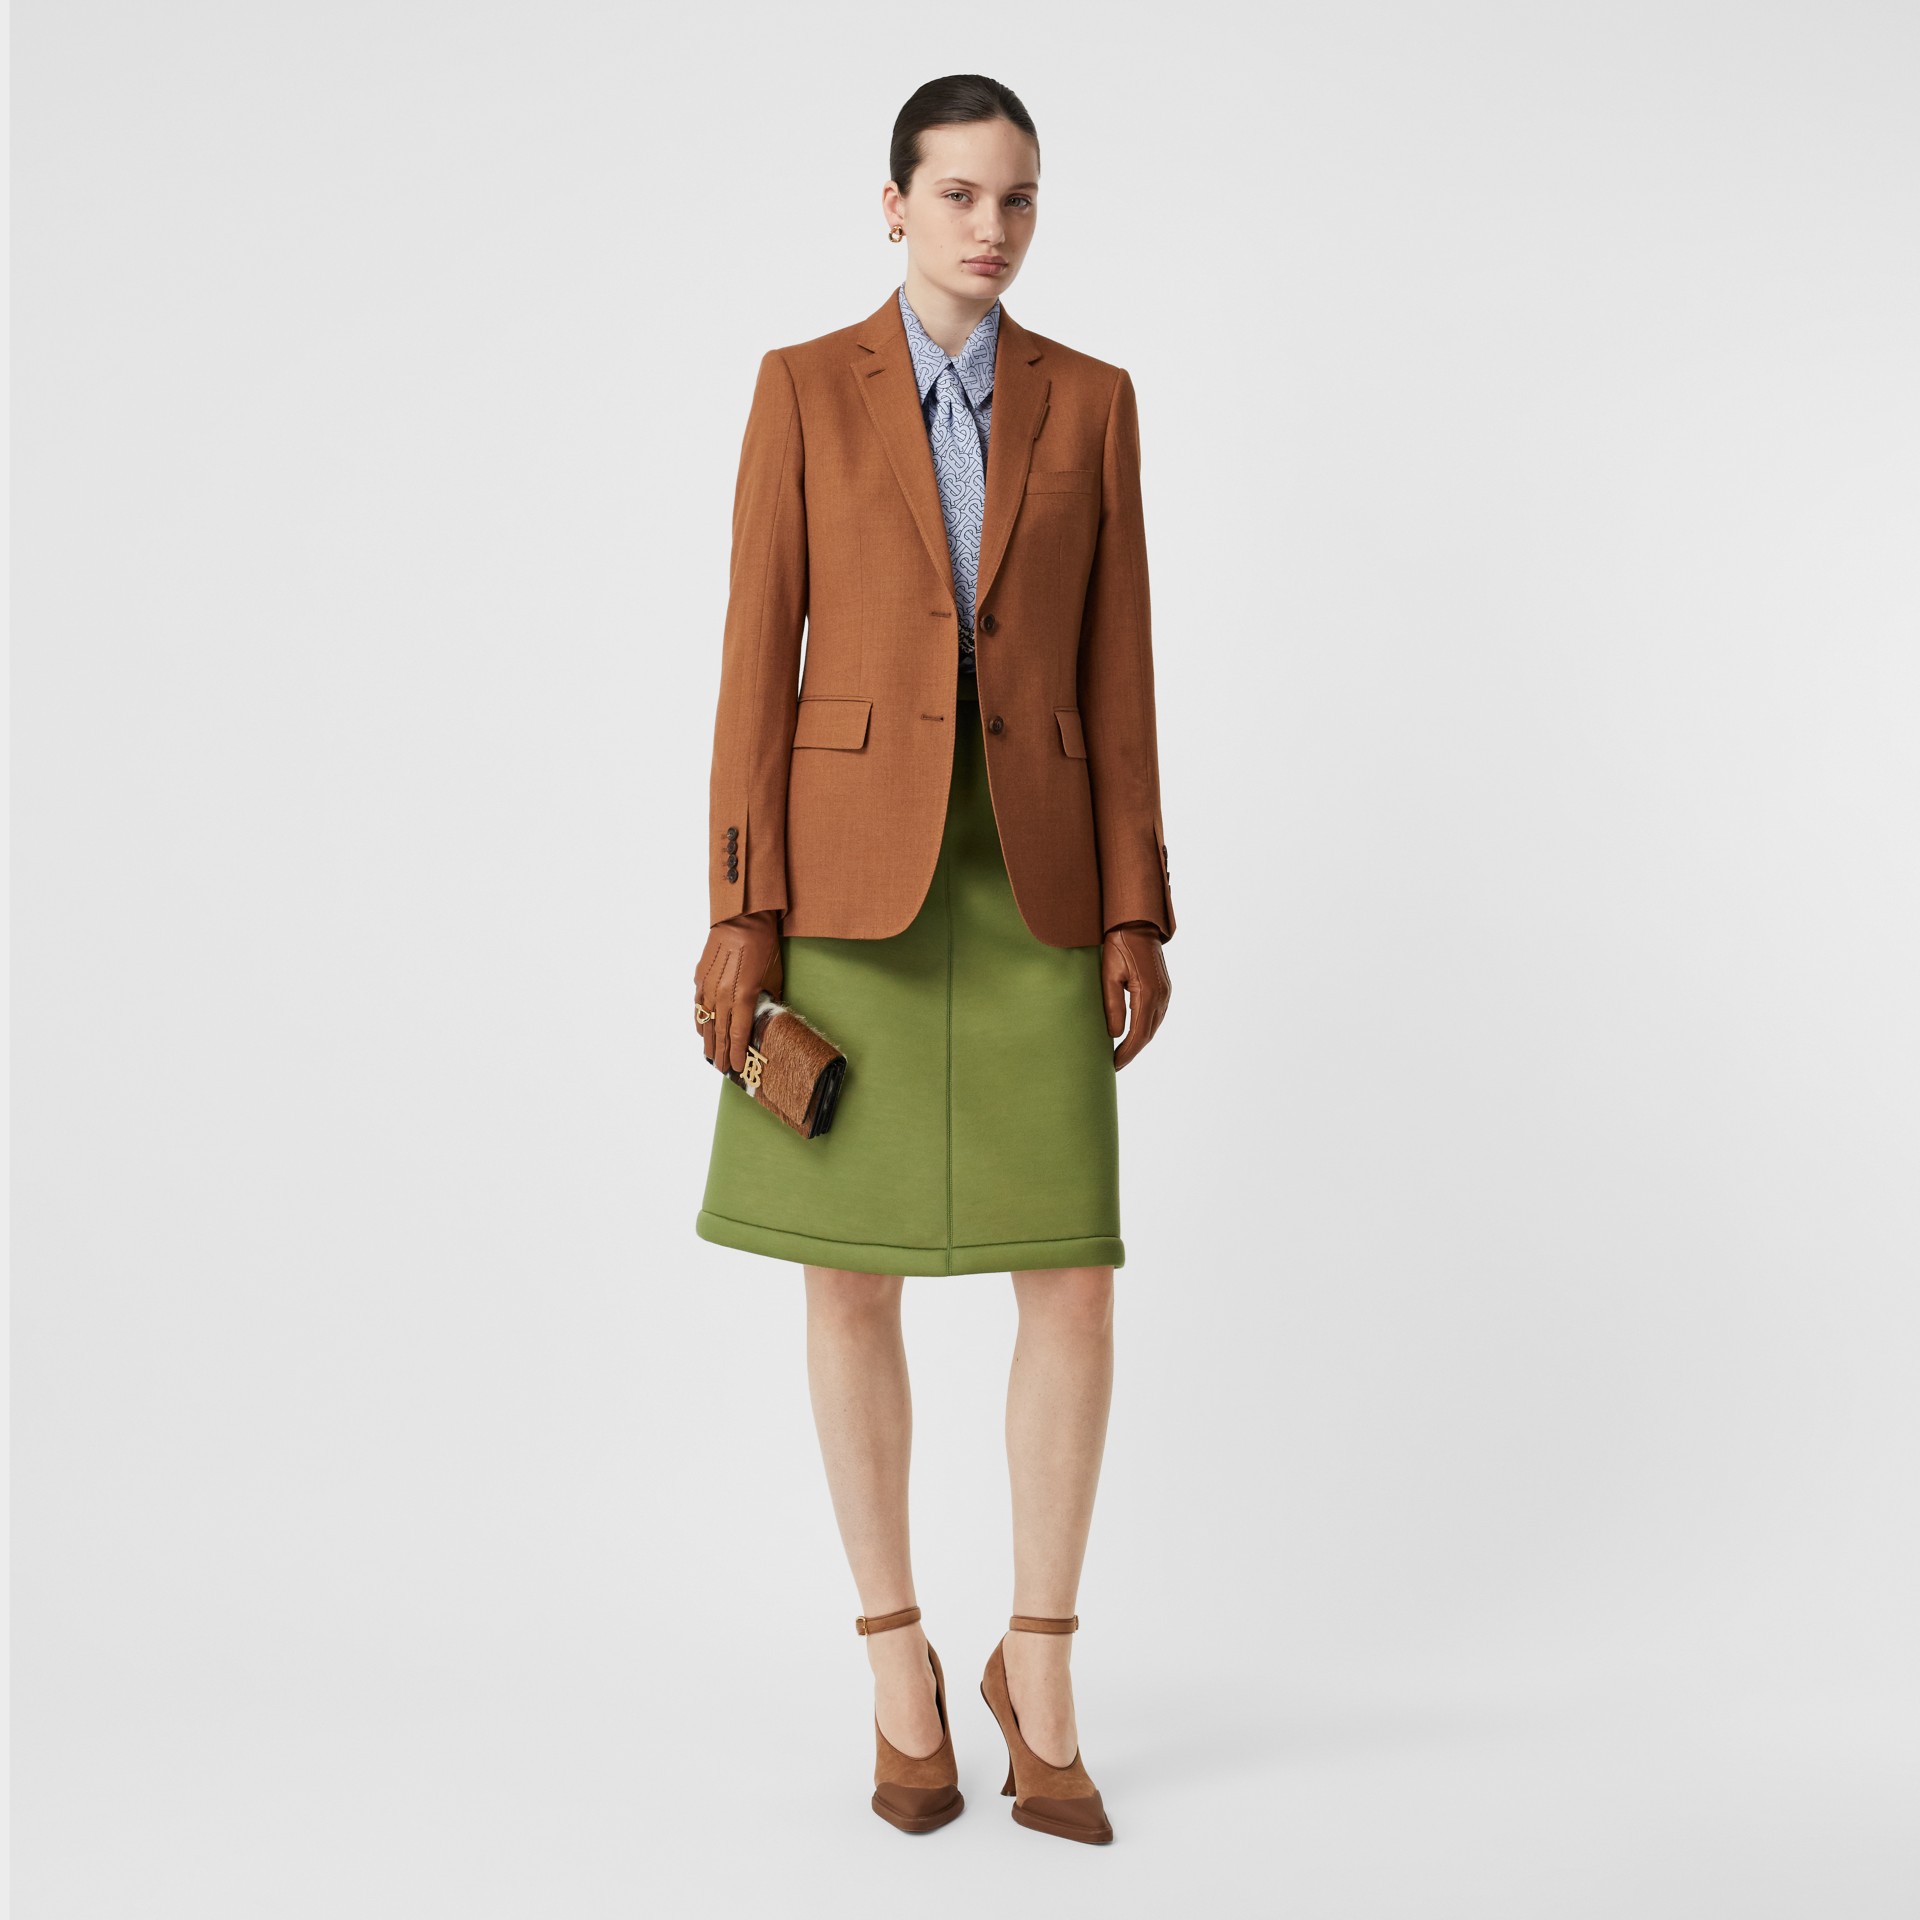 Wool, Silk and Cotton Blazer in Rust - Women | Burberry United States